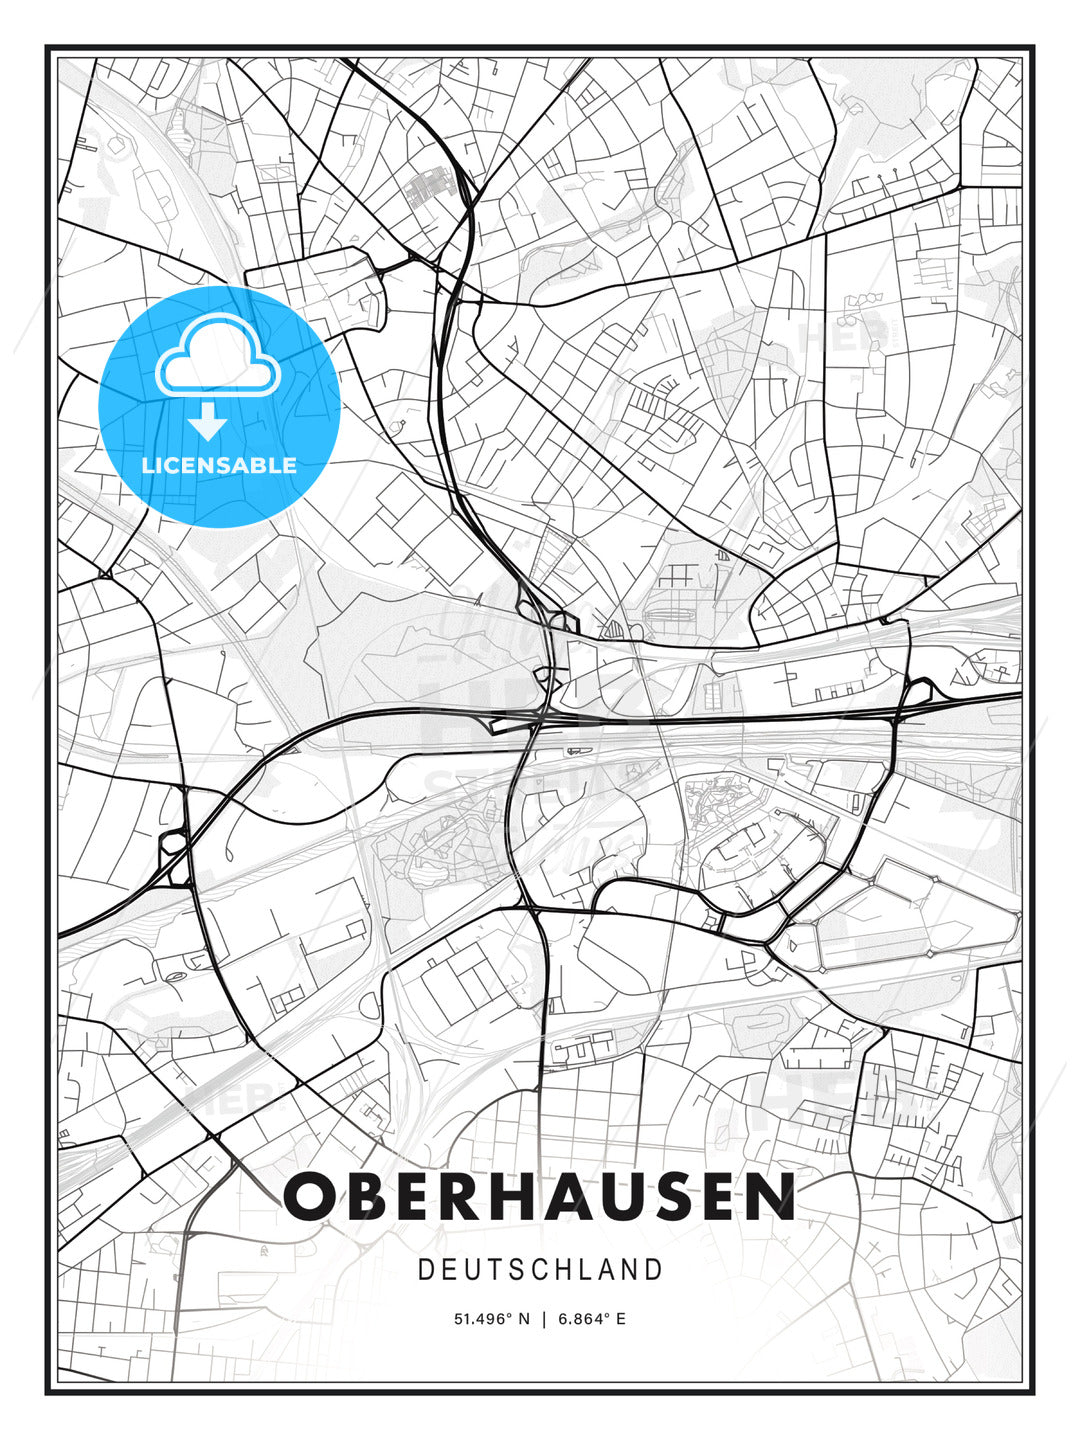 Oberhausen, Germany, Modern Print Template in Various Formats - HEBSTREITS Sketches